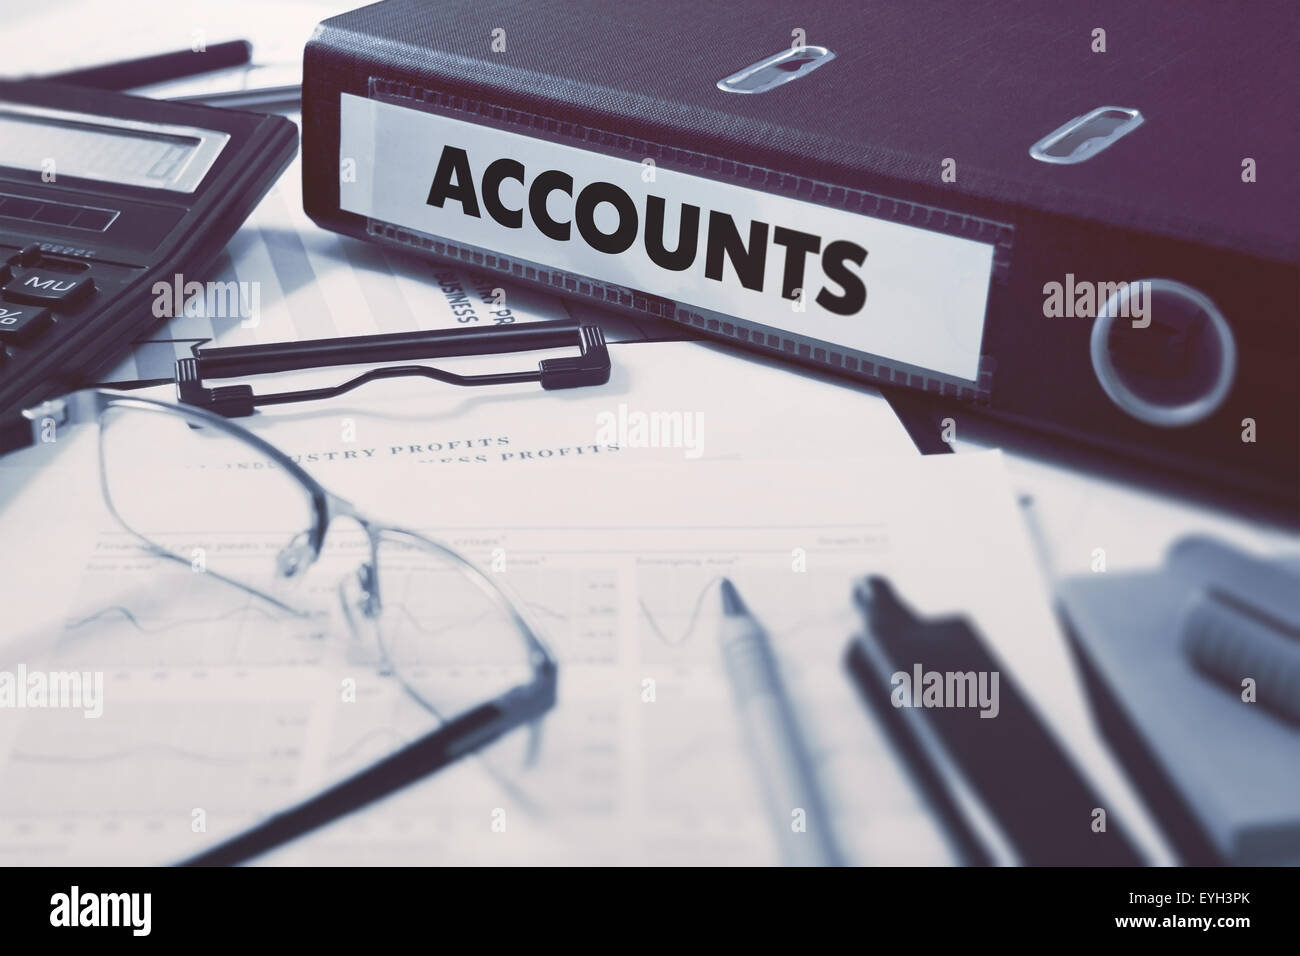 Accounts on Ring Binder. Blured, Toned Image. Stock Photo